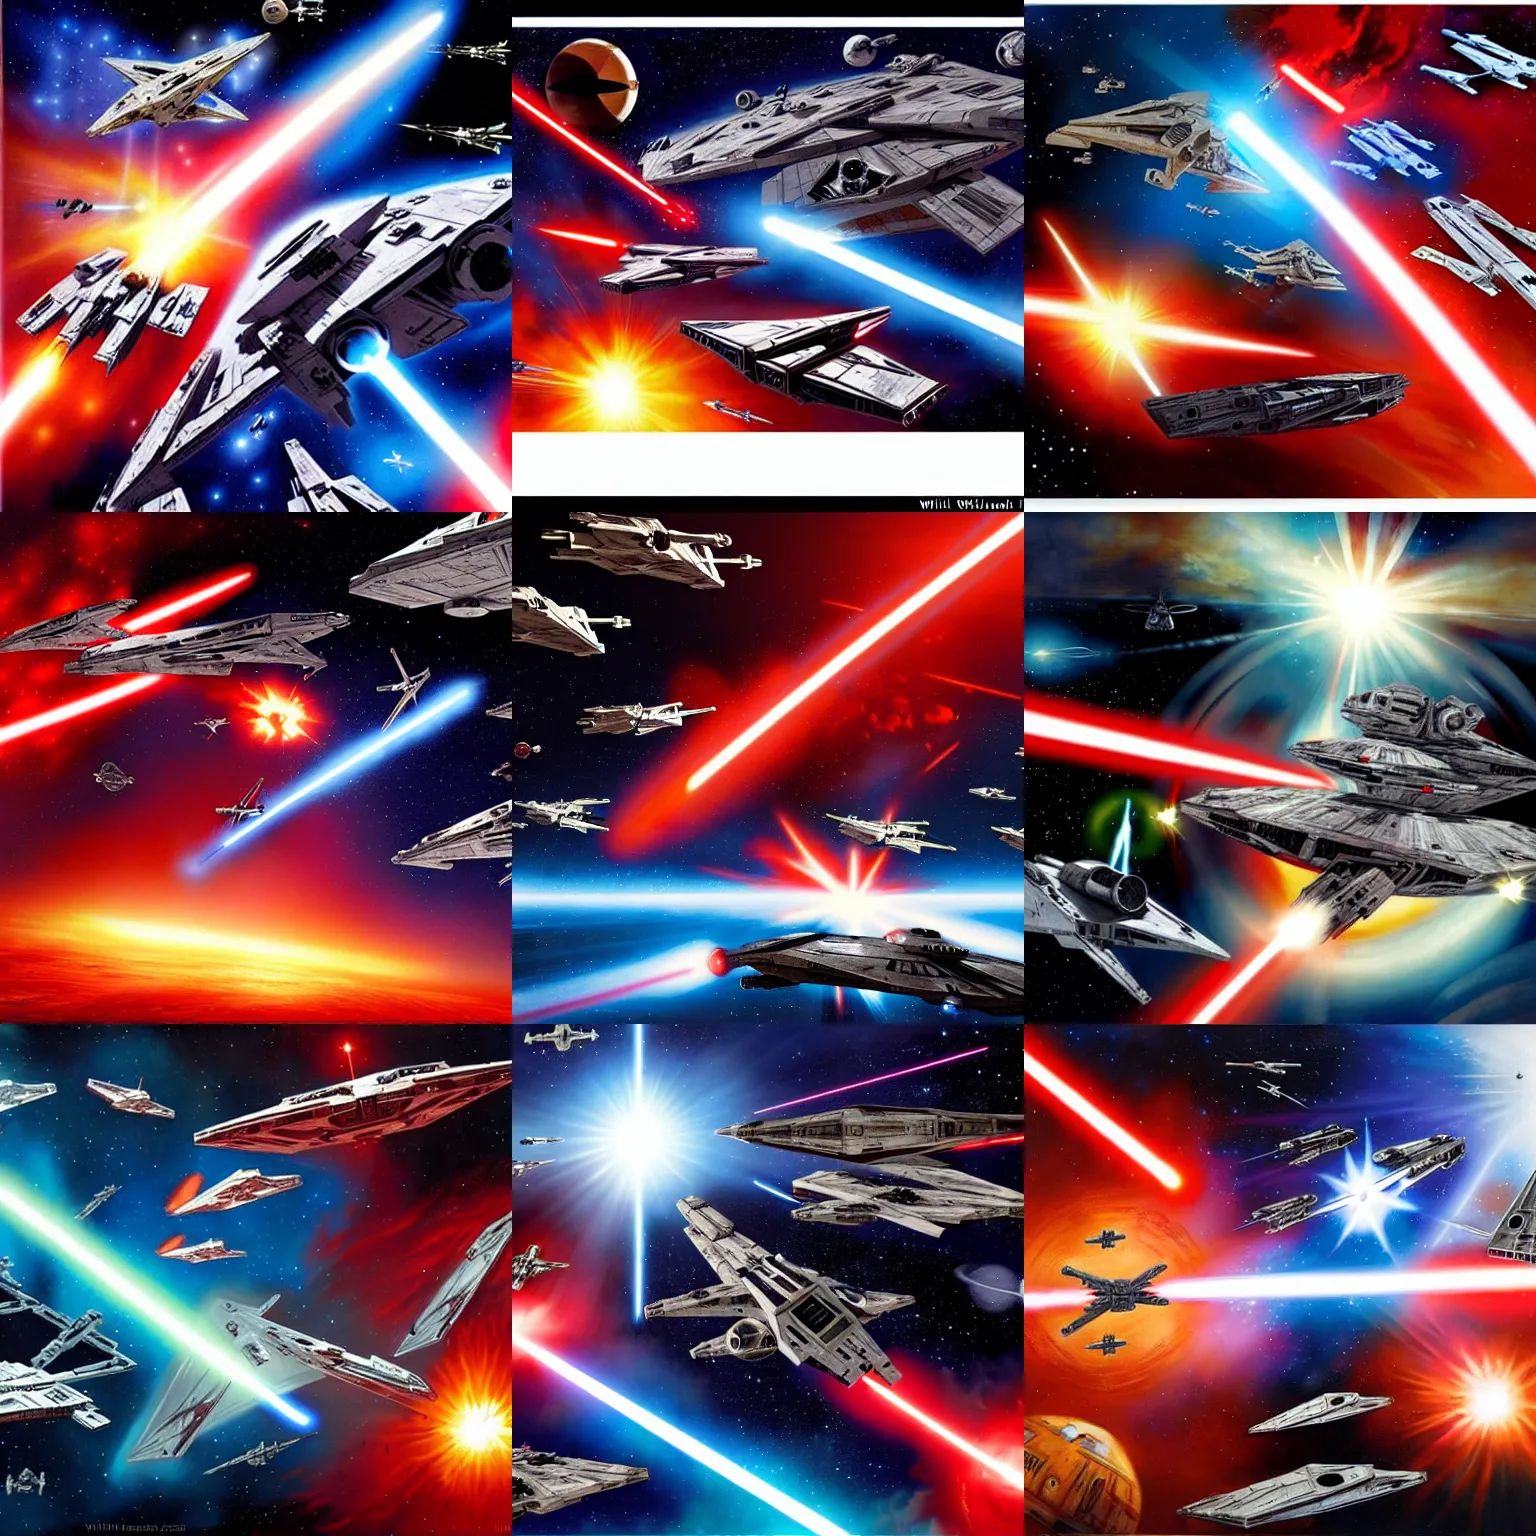 Prompt: Star Wars battle with several spaceships by William Turner, oil painting, high contrast, space scene with lens flare, giant red star in background, cinematic